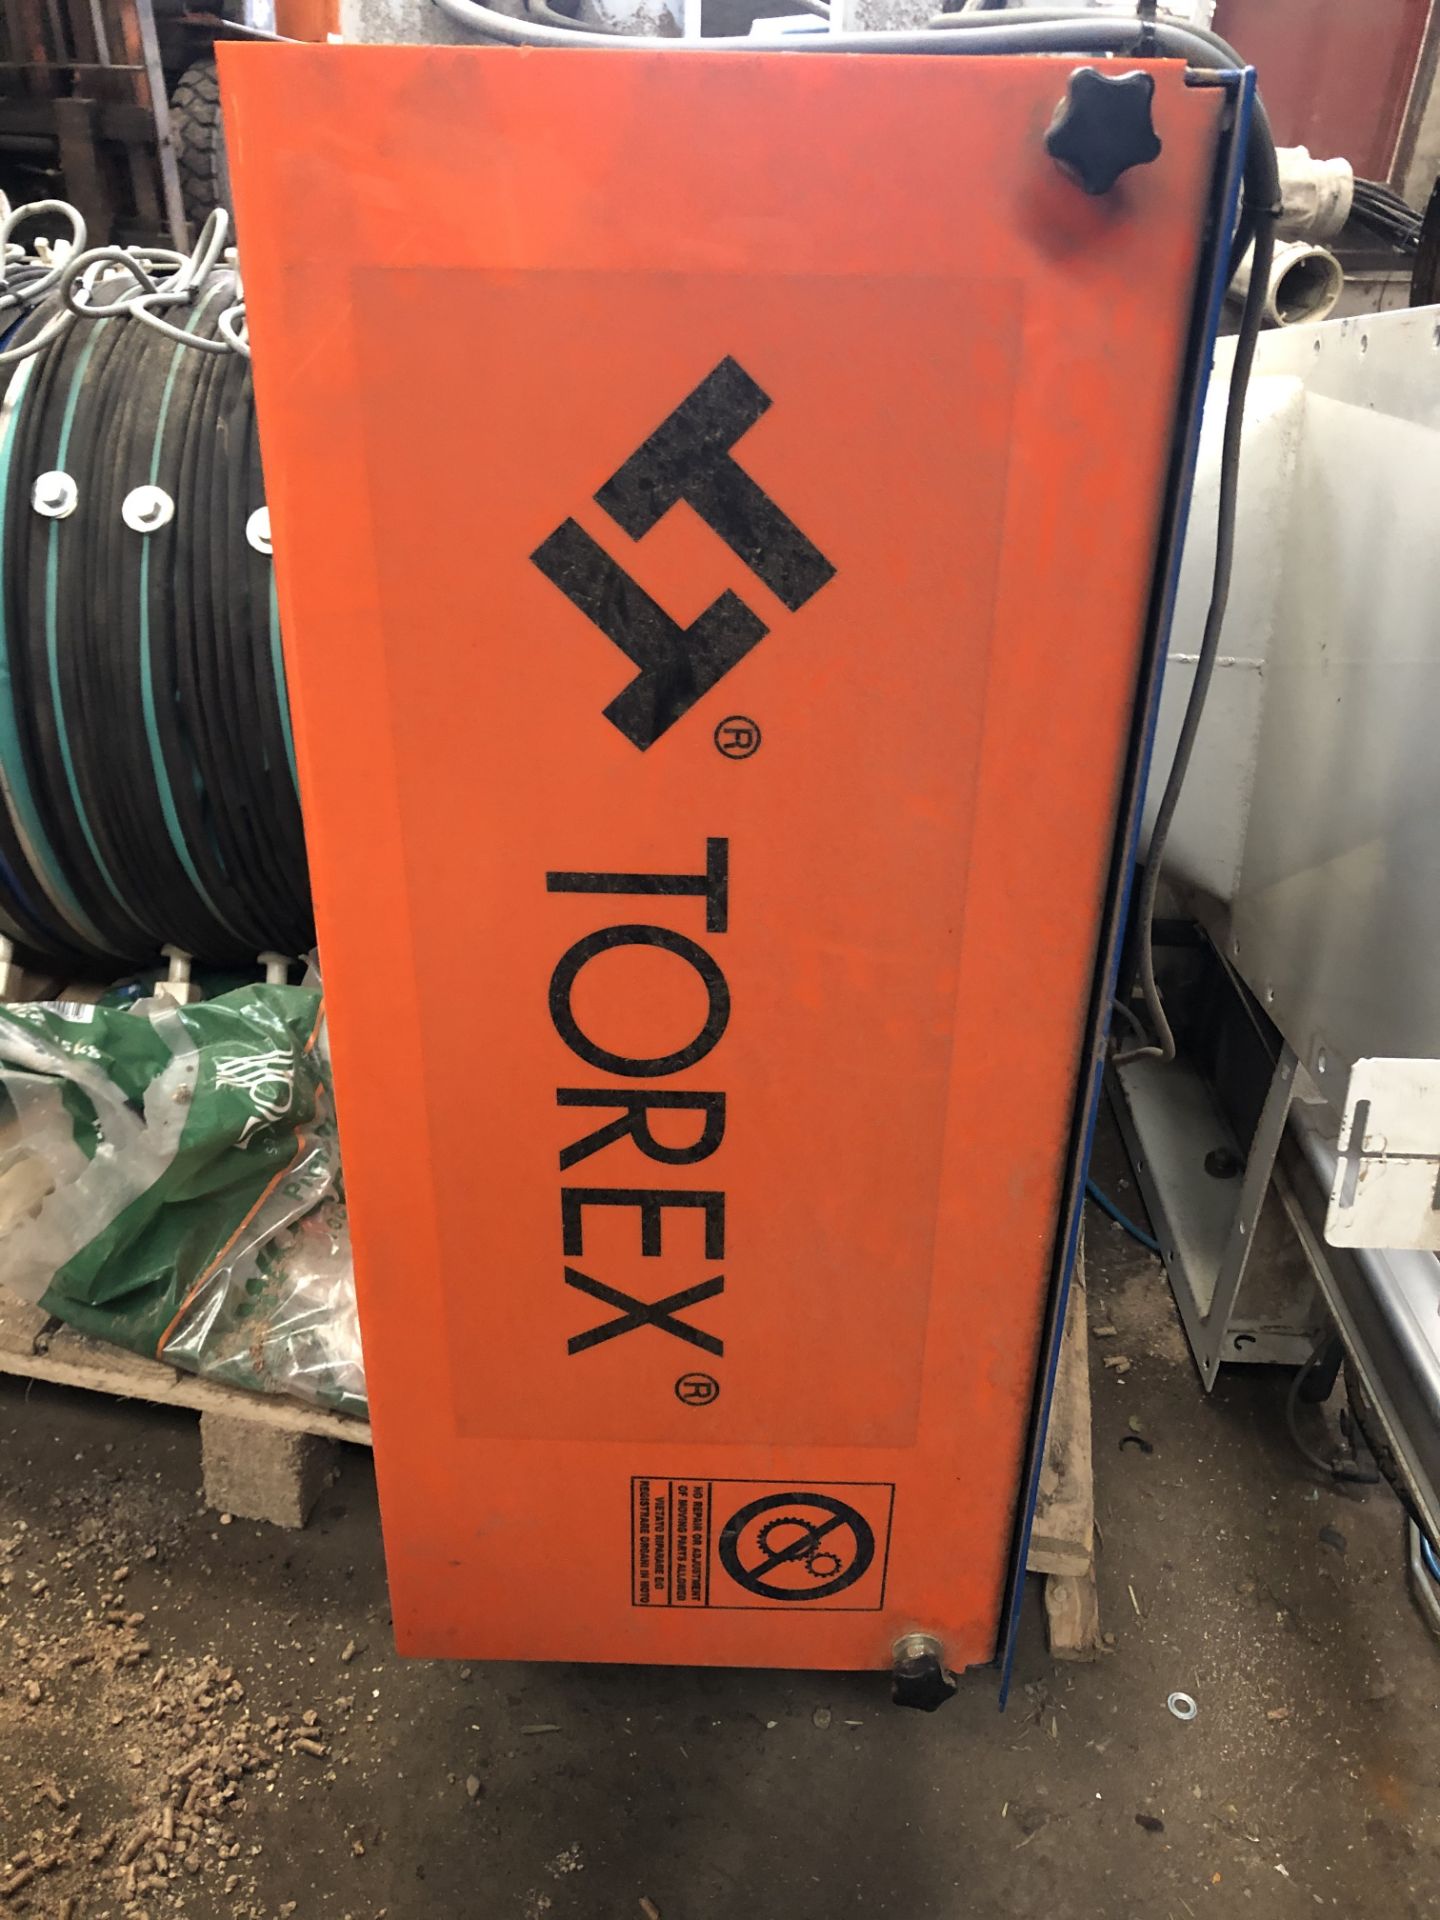 Torex Loading Bellow (as new condition - seen very little if any use), year of manufacture 2017, - Image 4 of 6